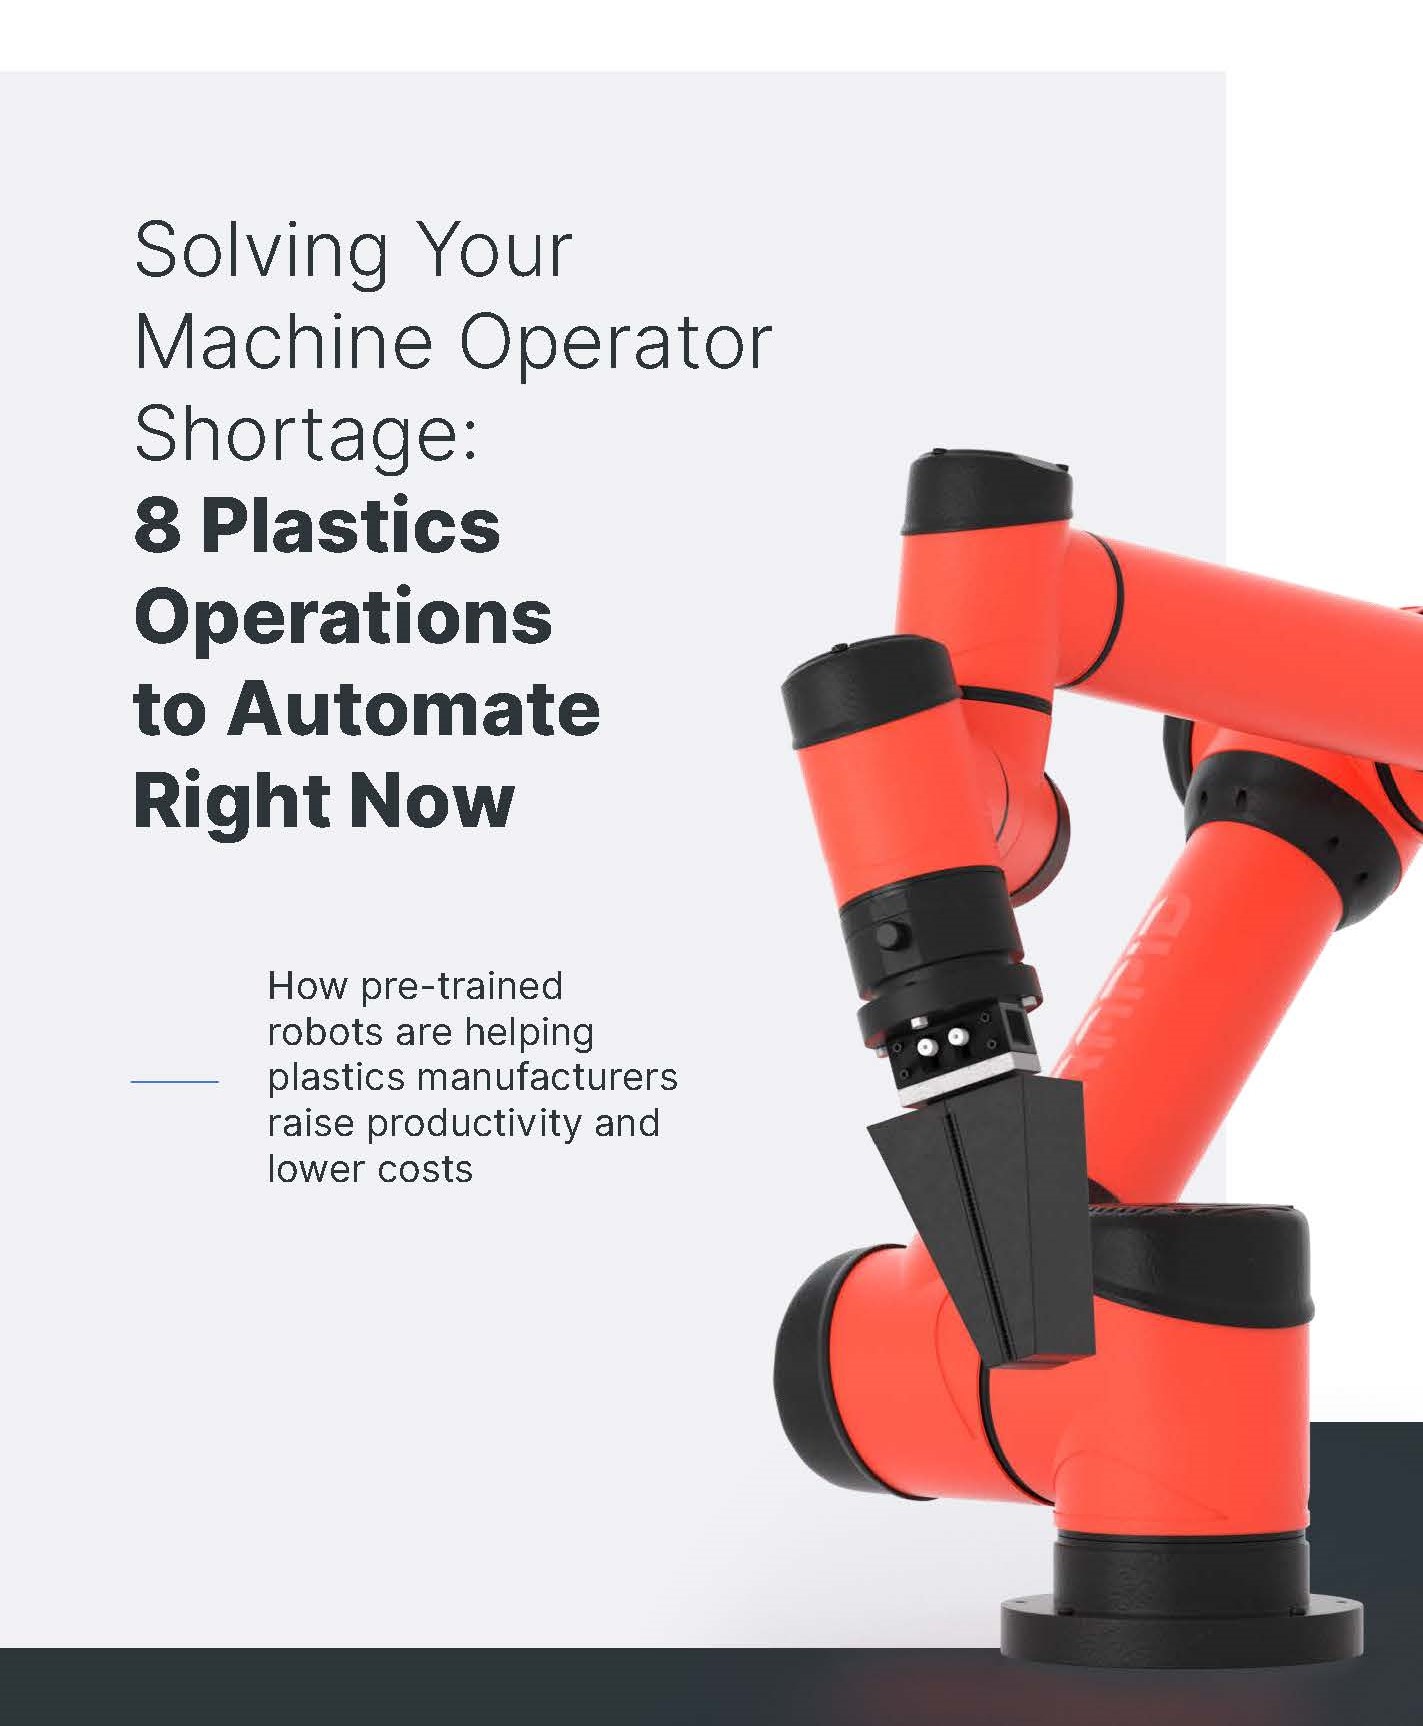 Solving Your Machine Operator Shortage: 8 Plastics Operations to Automate Right Now